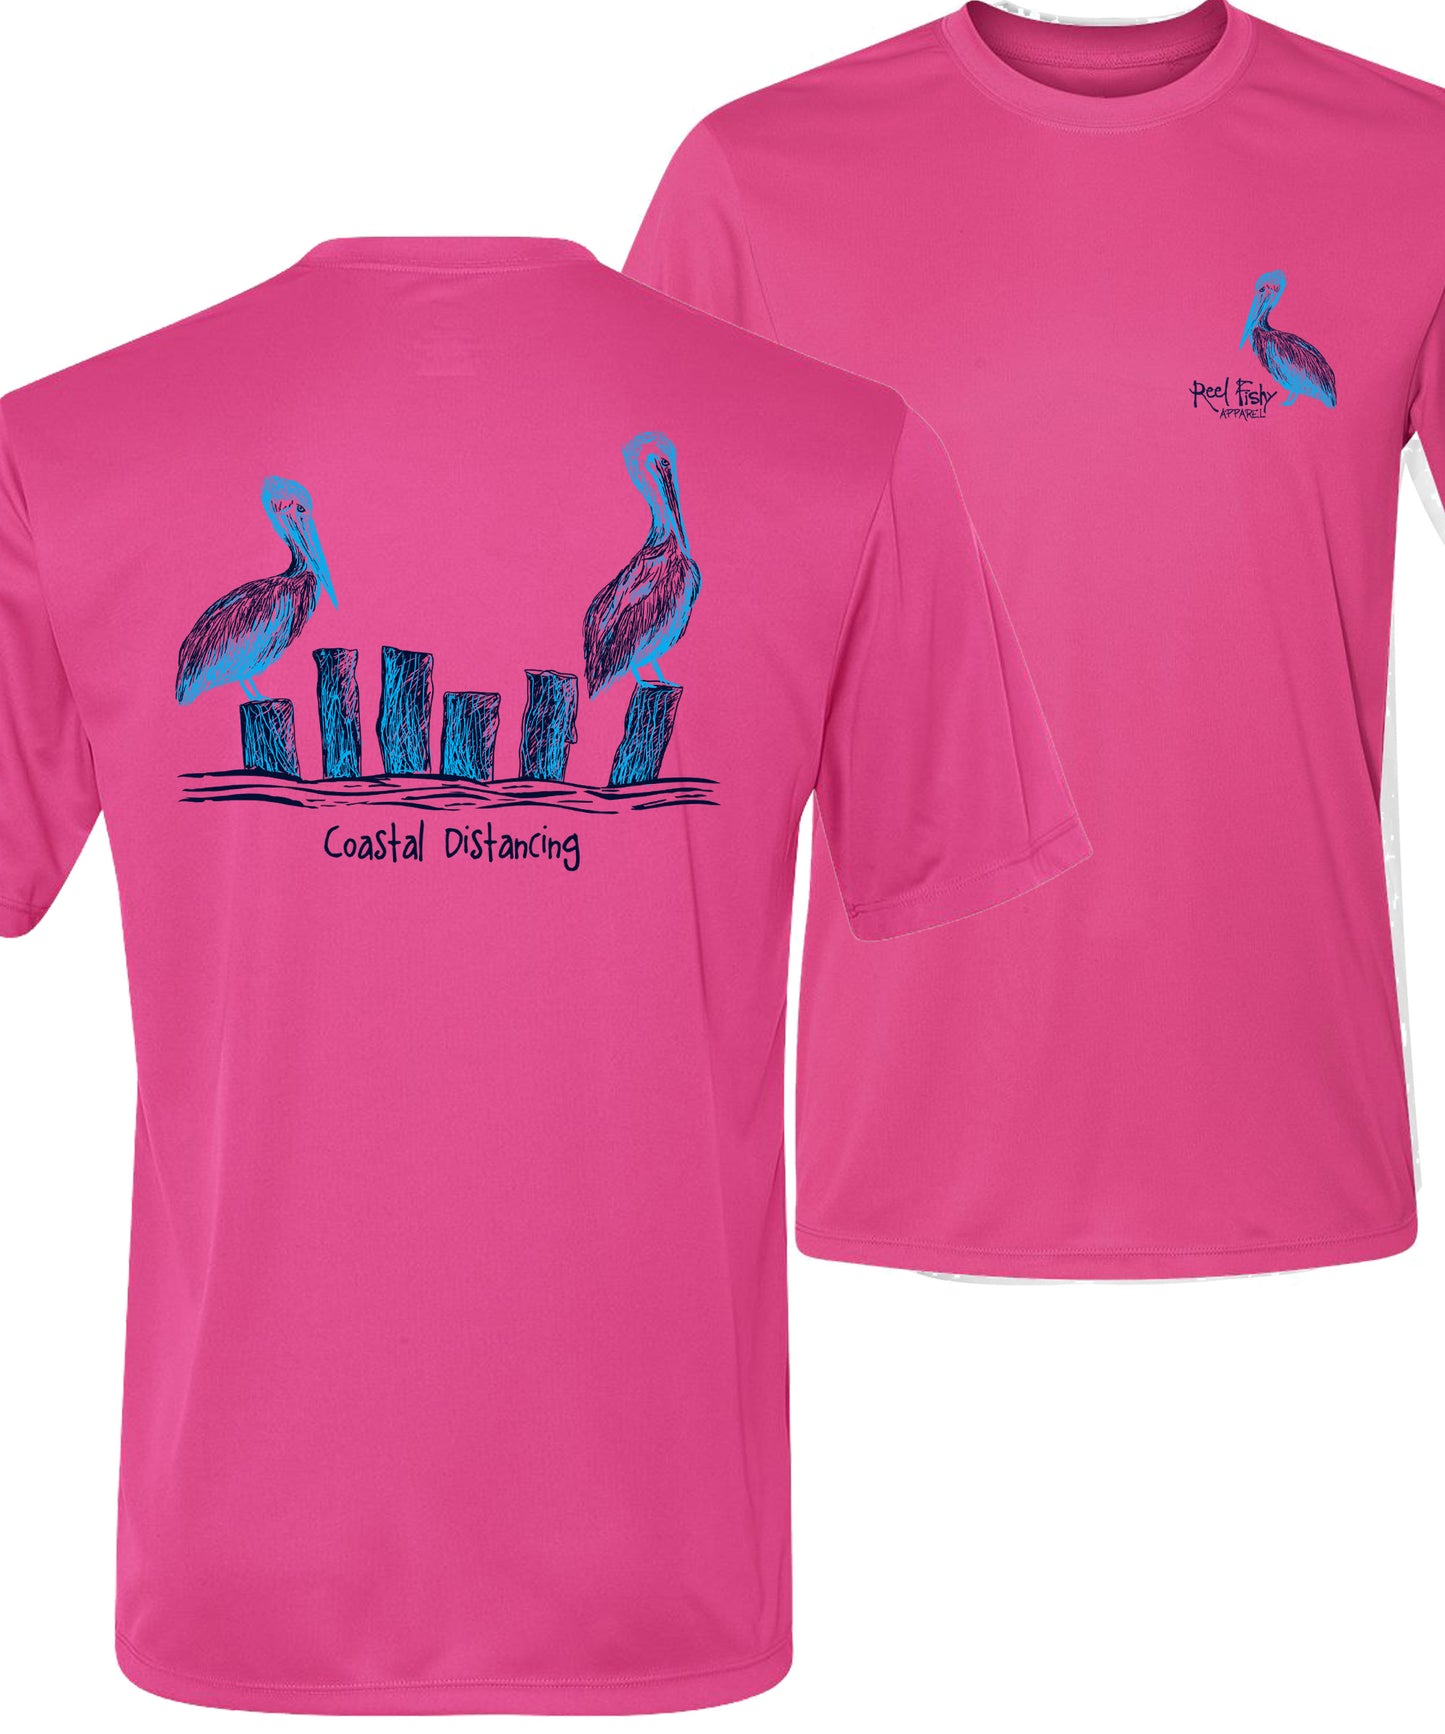 Pelicans Coastal Distancing Performance Dry-fit Lt. Pink Short Sleeve Shirts